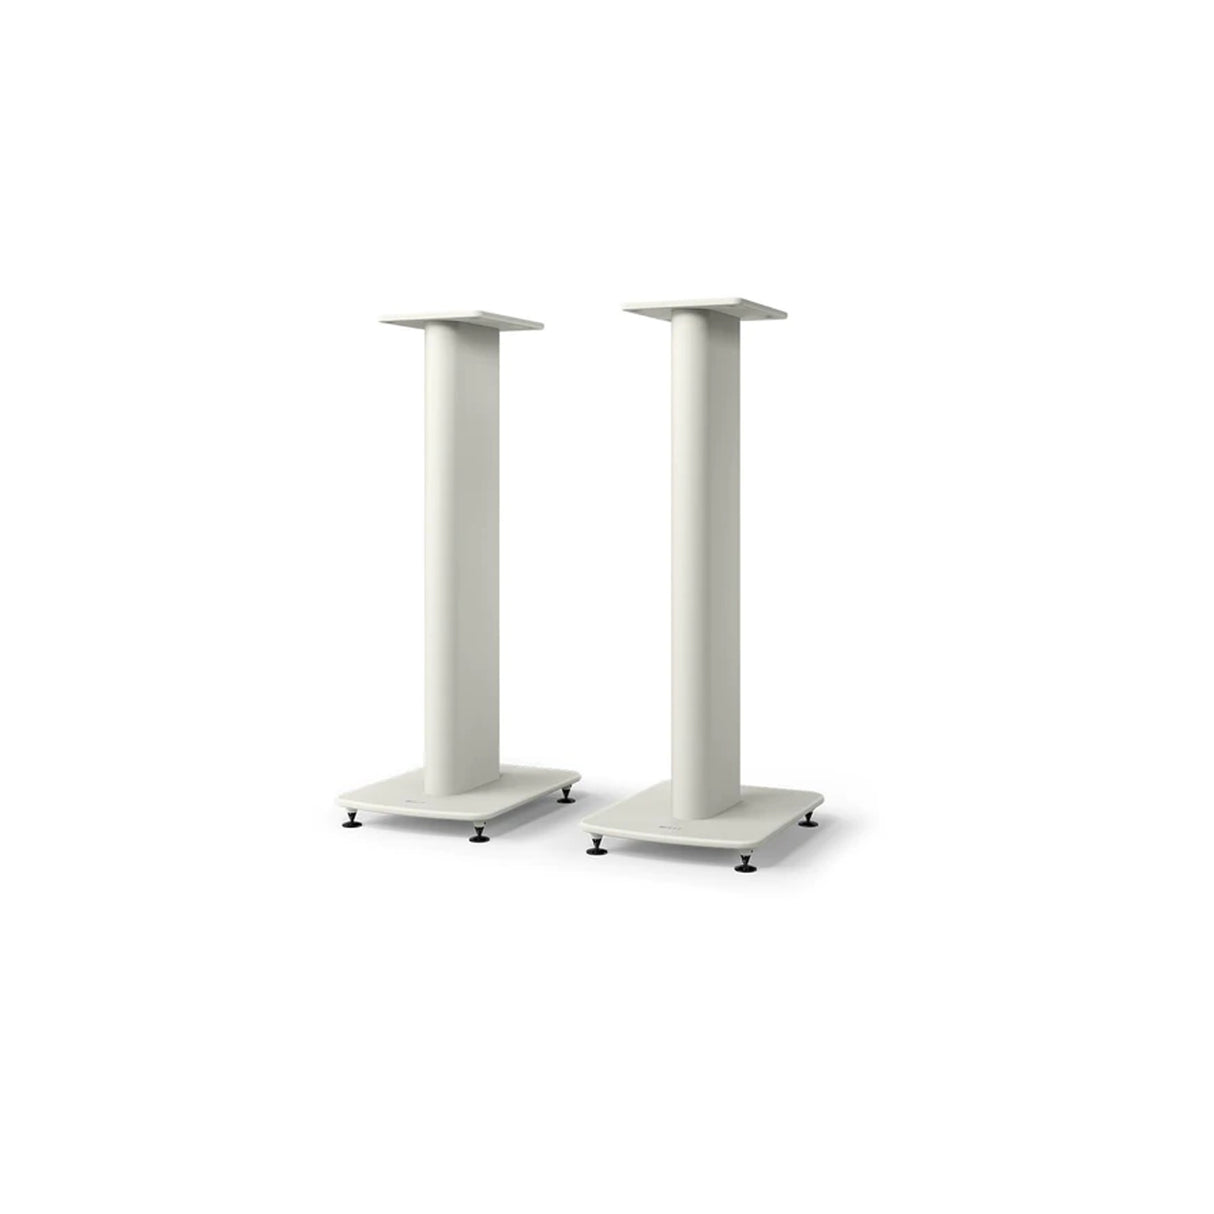 KEF S2 Floor Stands - For Kef LS50 Series (Mineral White)